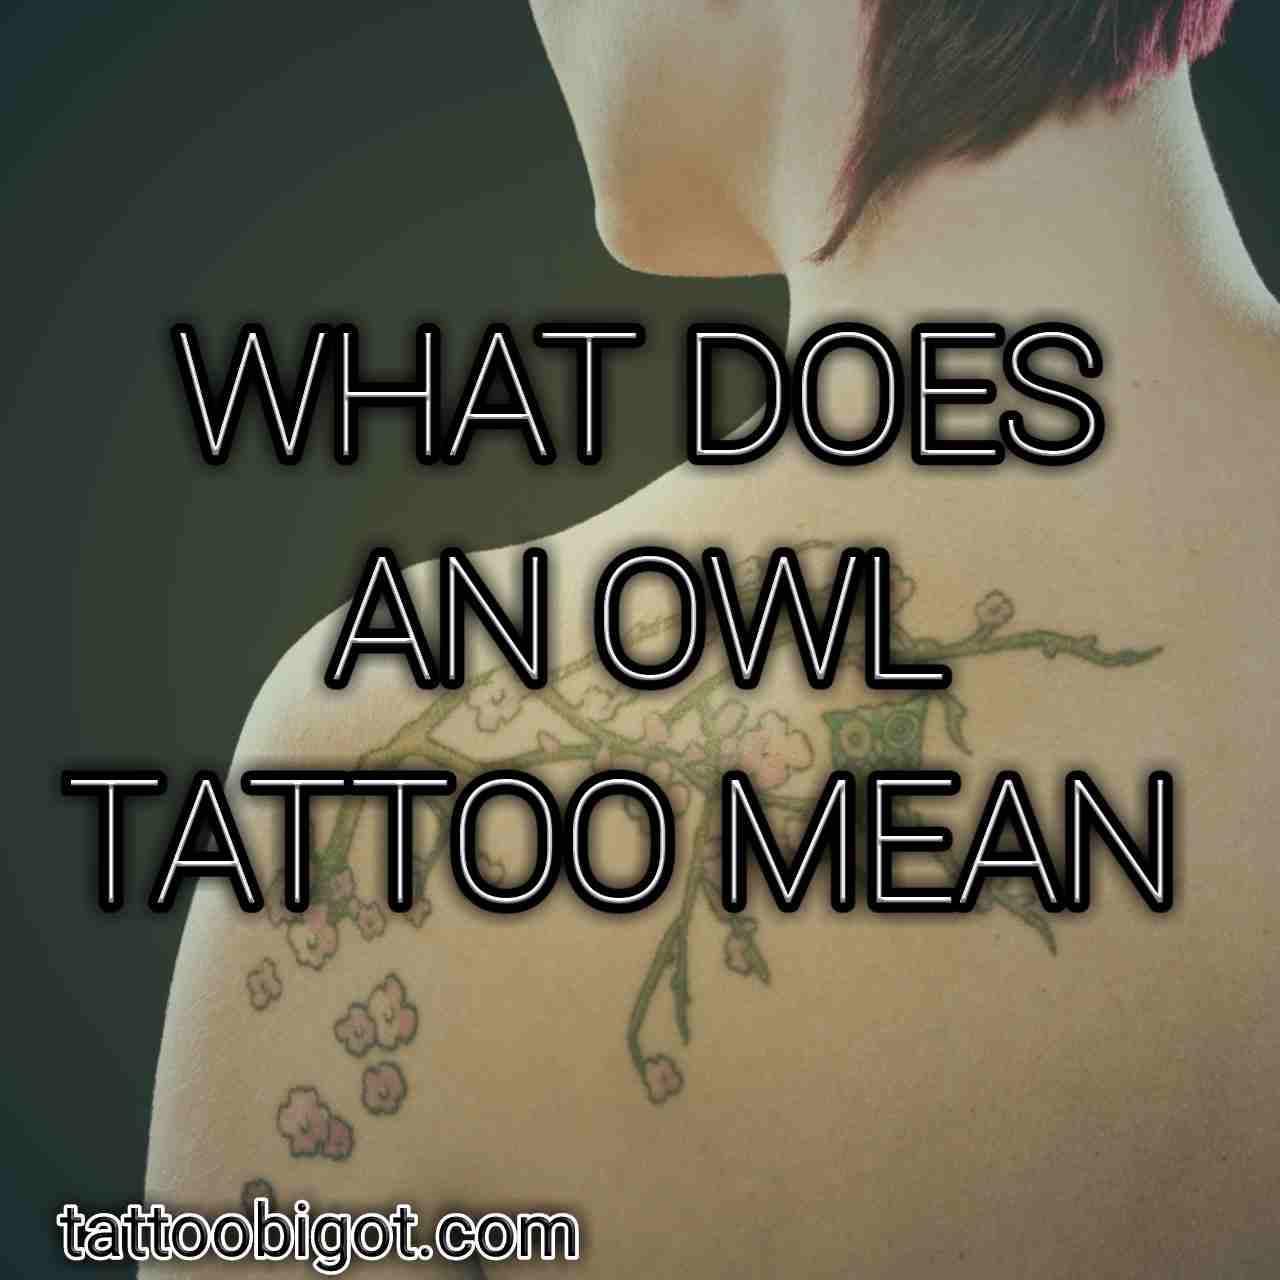 What does an owl tattoo mean